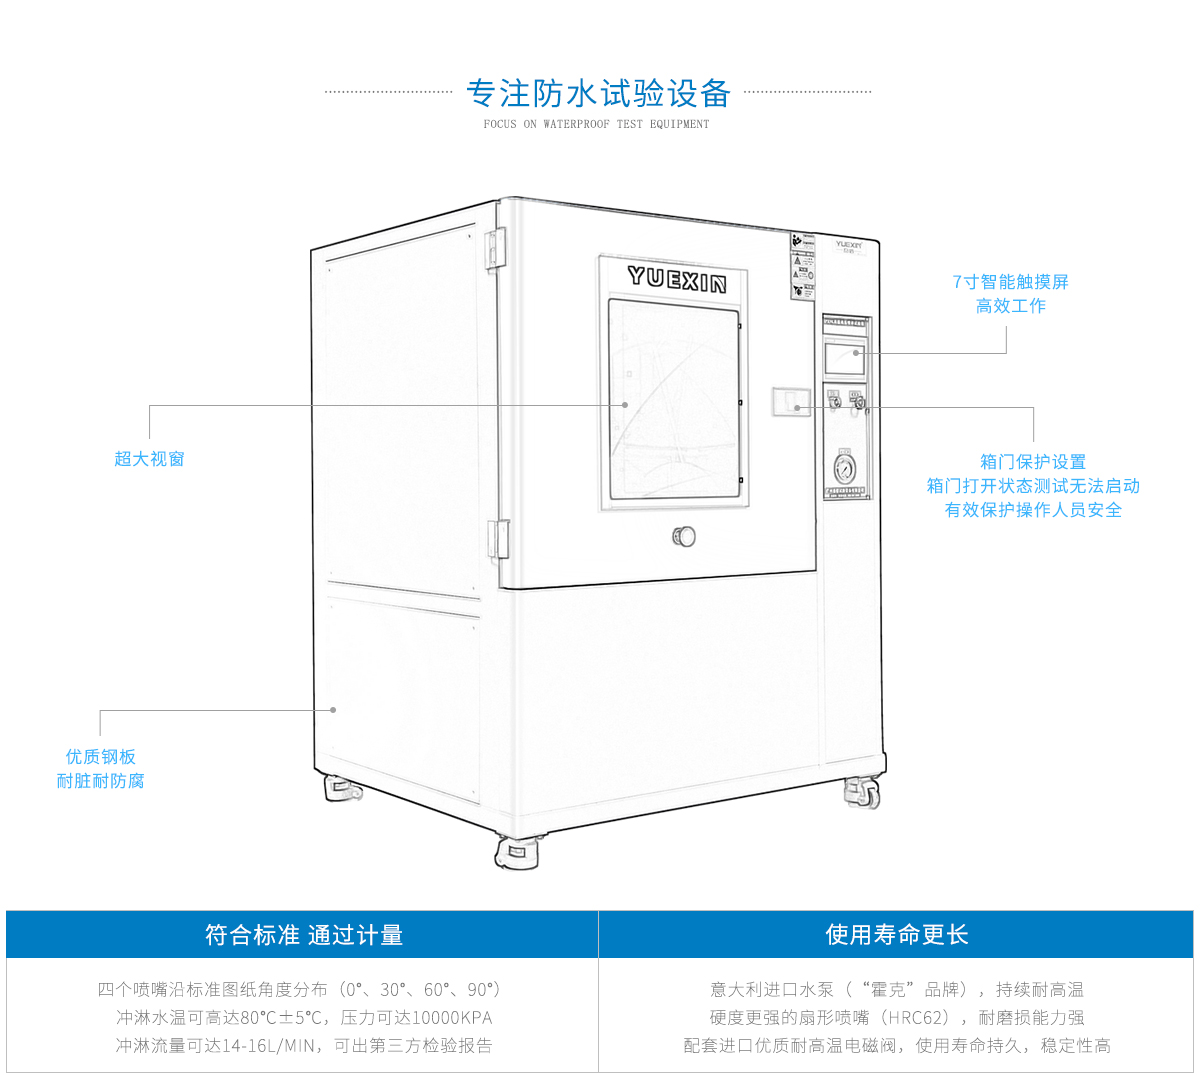 IPX9K high temperature and high pressure rain test chamber